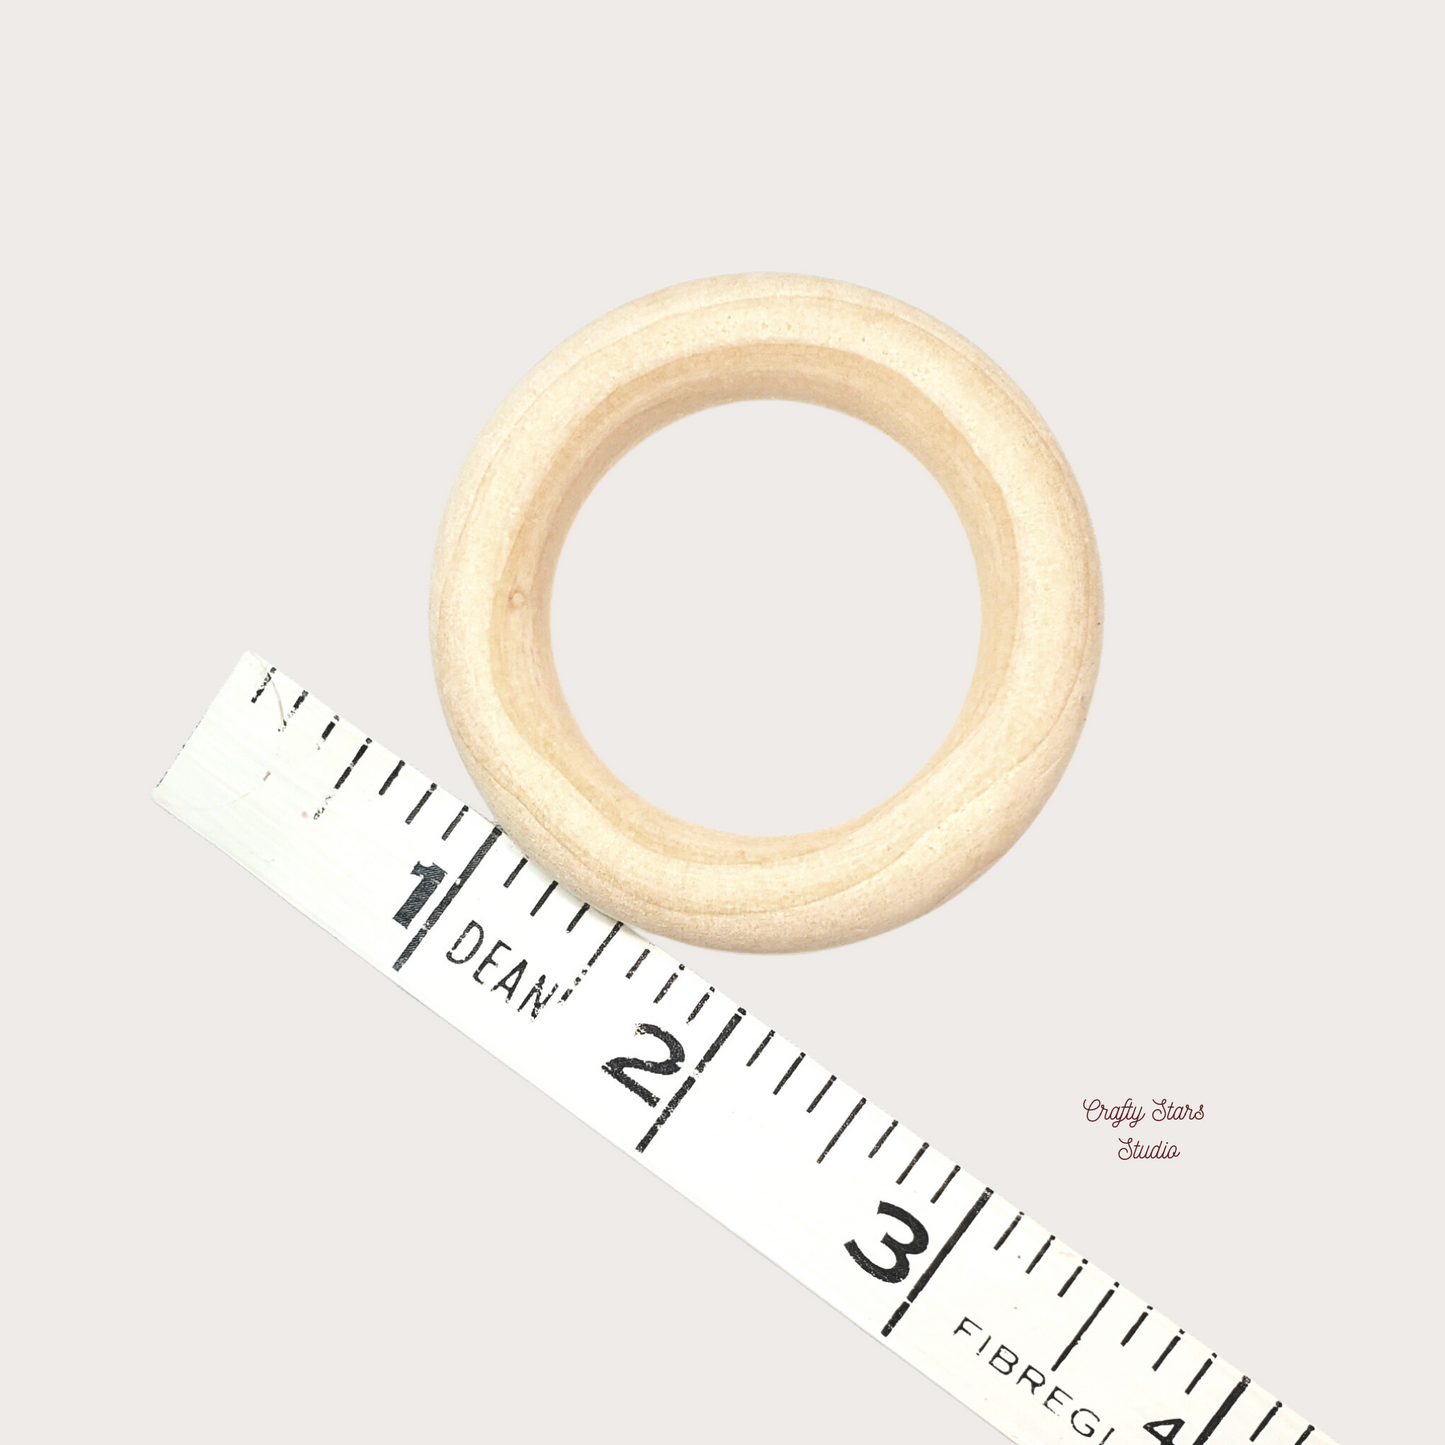 Wooden Rings (set of 10)